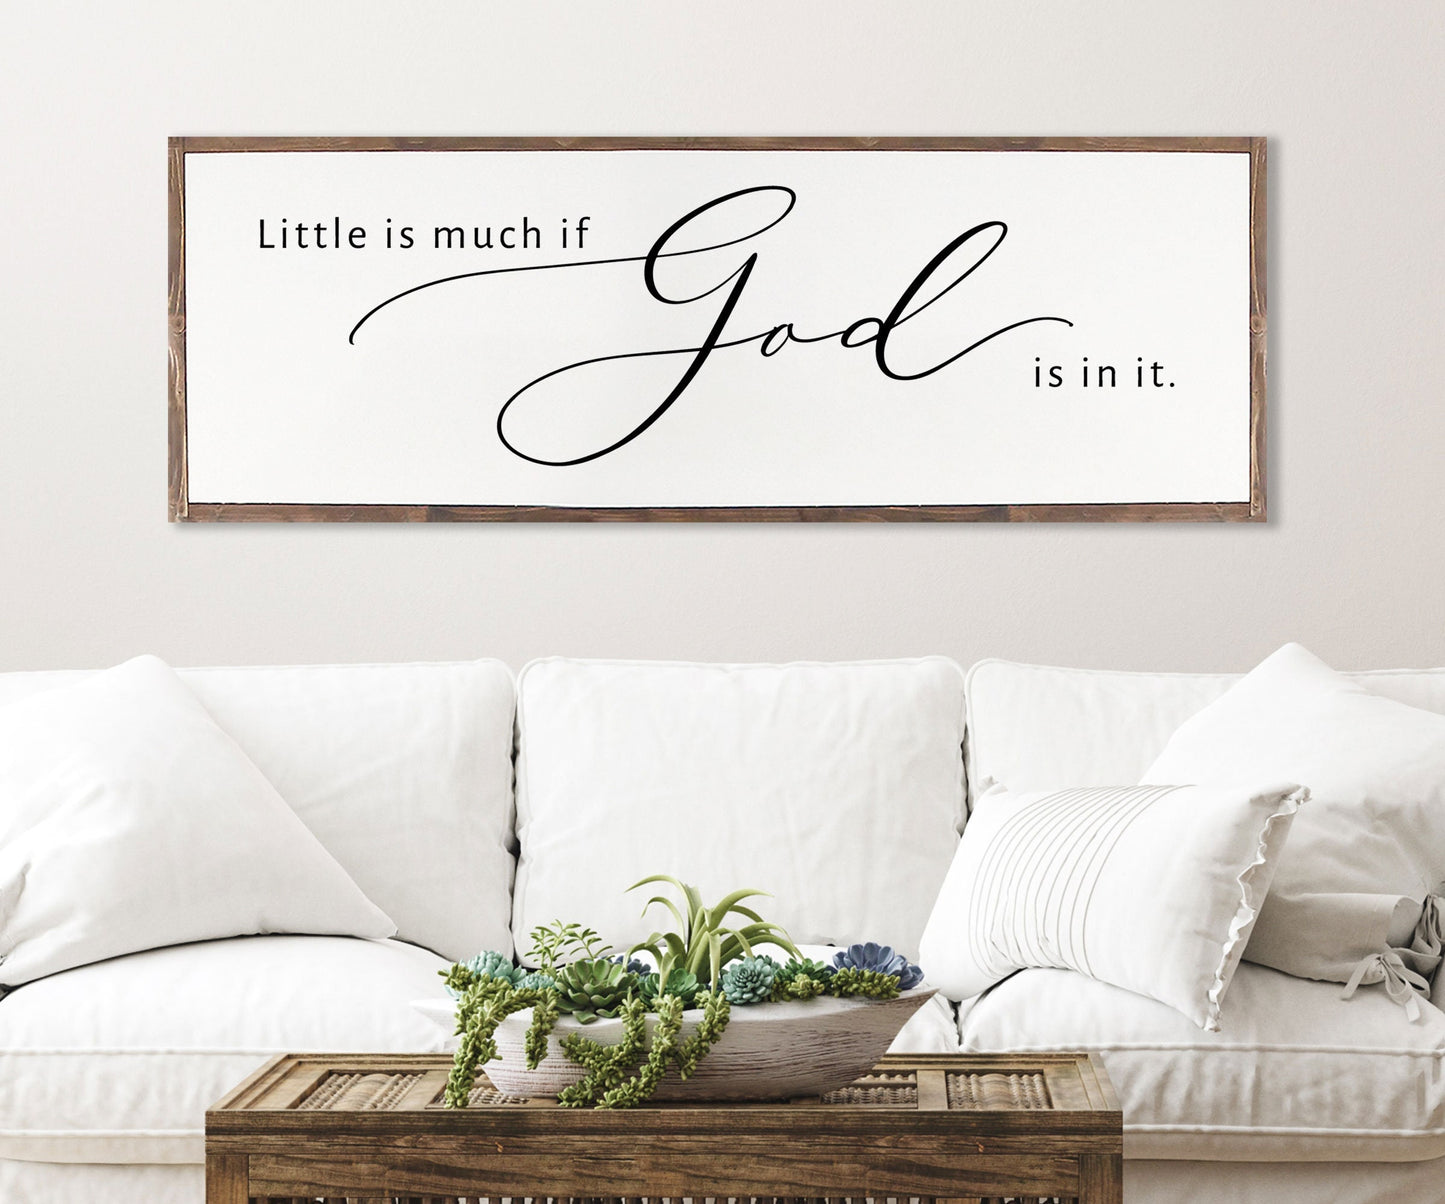 Little Is Much If God is In It Wood Sign | CHRISTIAN WALL ART | framed Wood Sign | Home Decor | Scripture Sign |  Little is Much Wood Sign